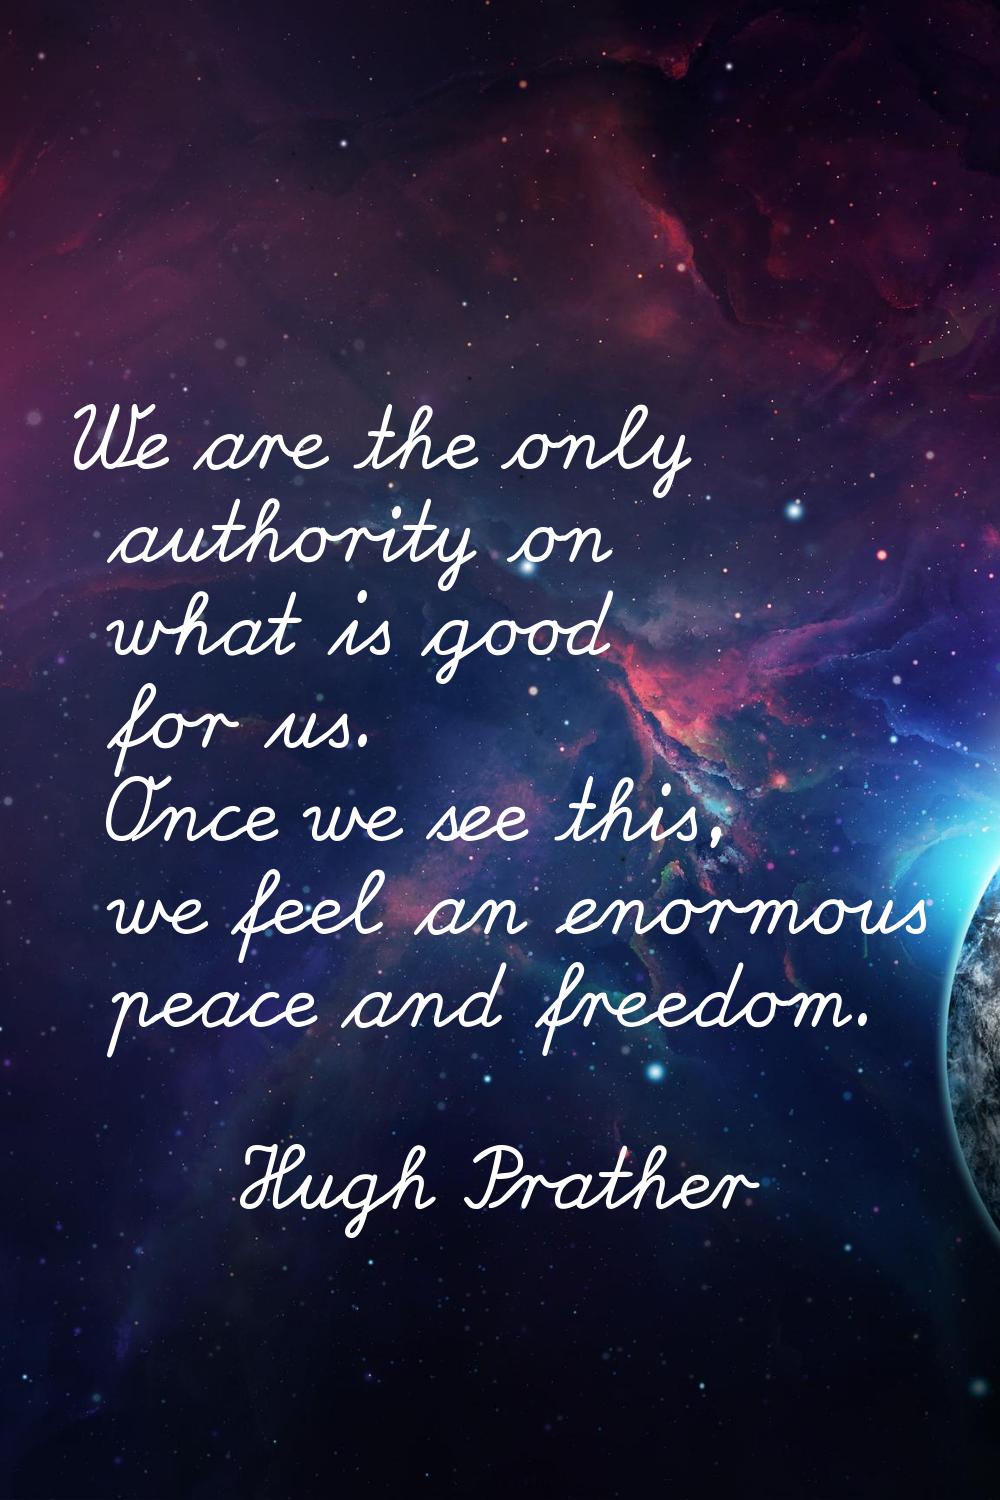 We are the only authority on what is good for us. Once we see this, we feel an enormous peace and f